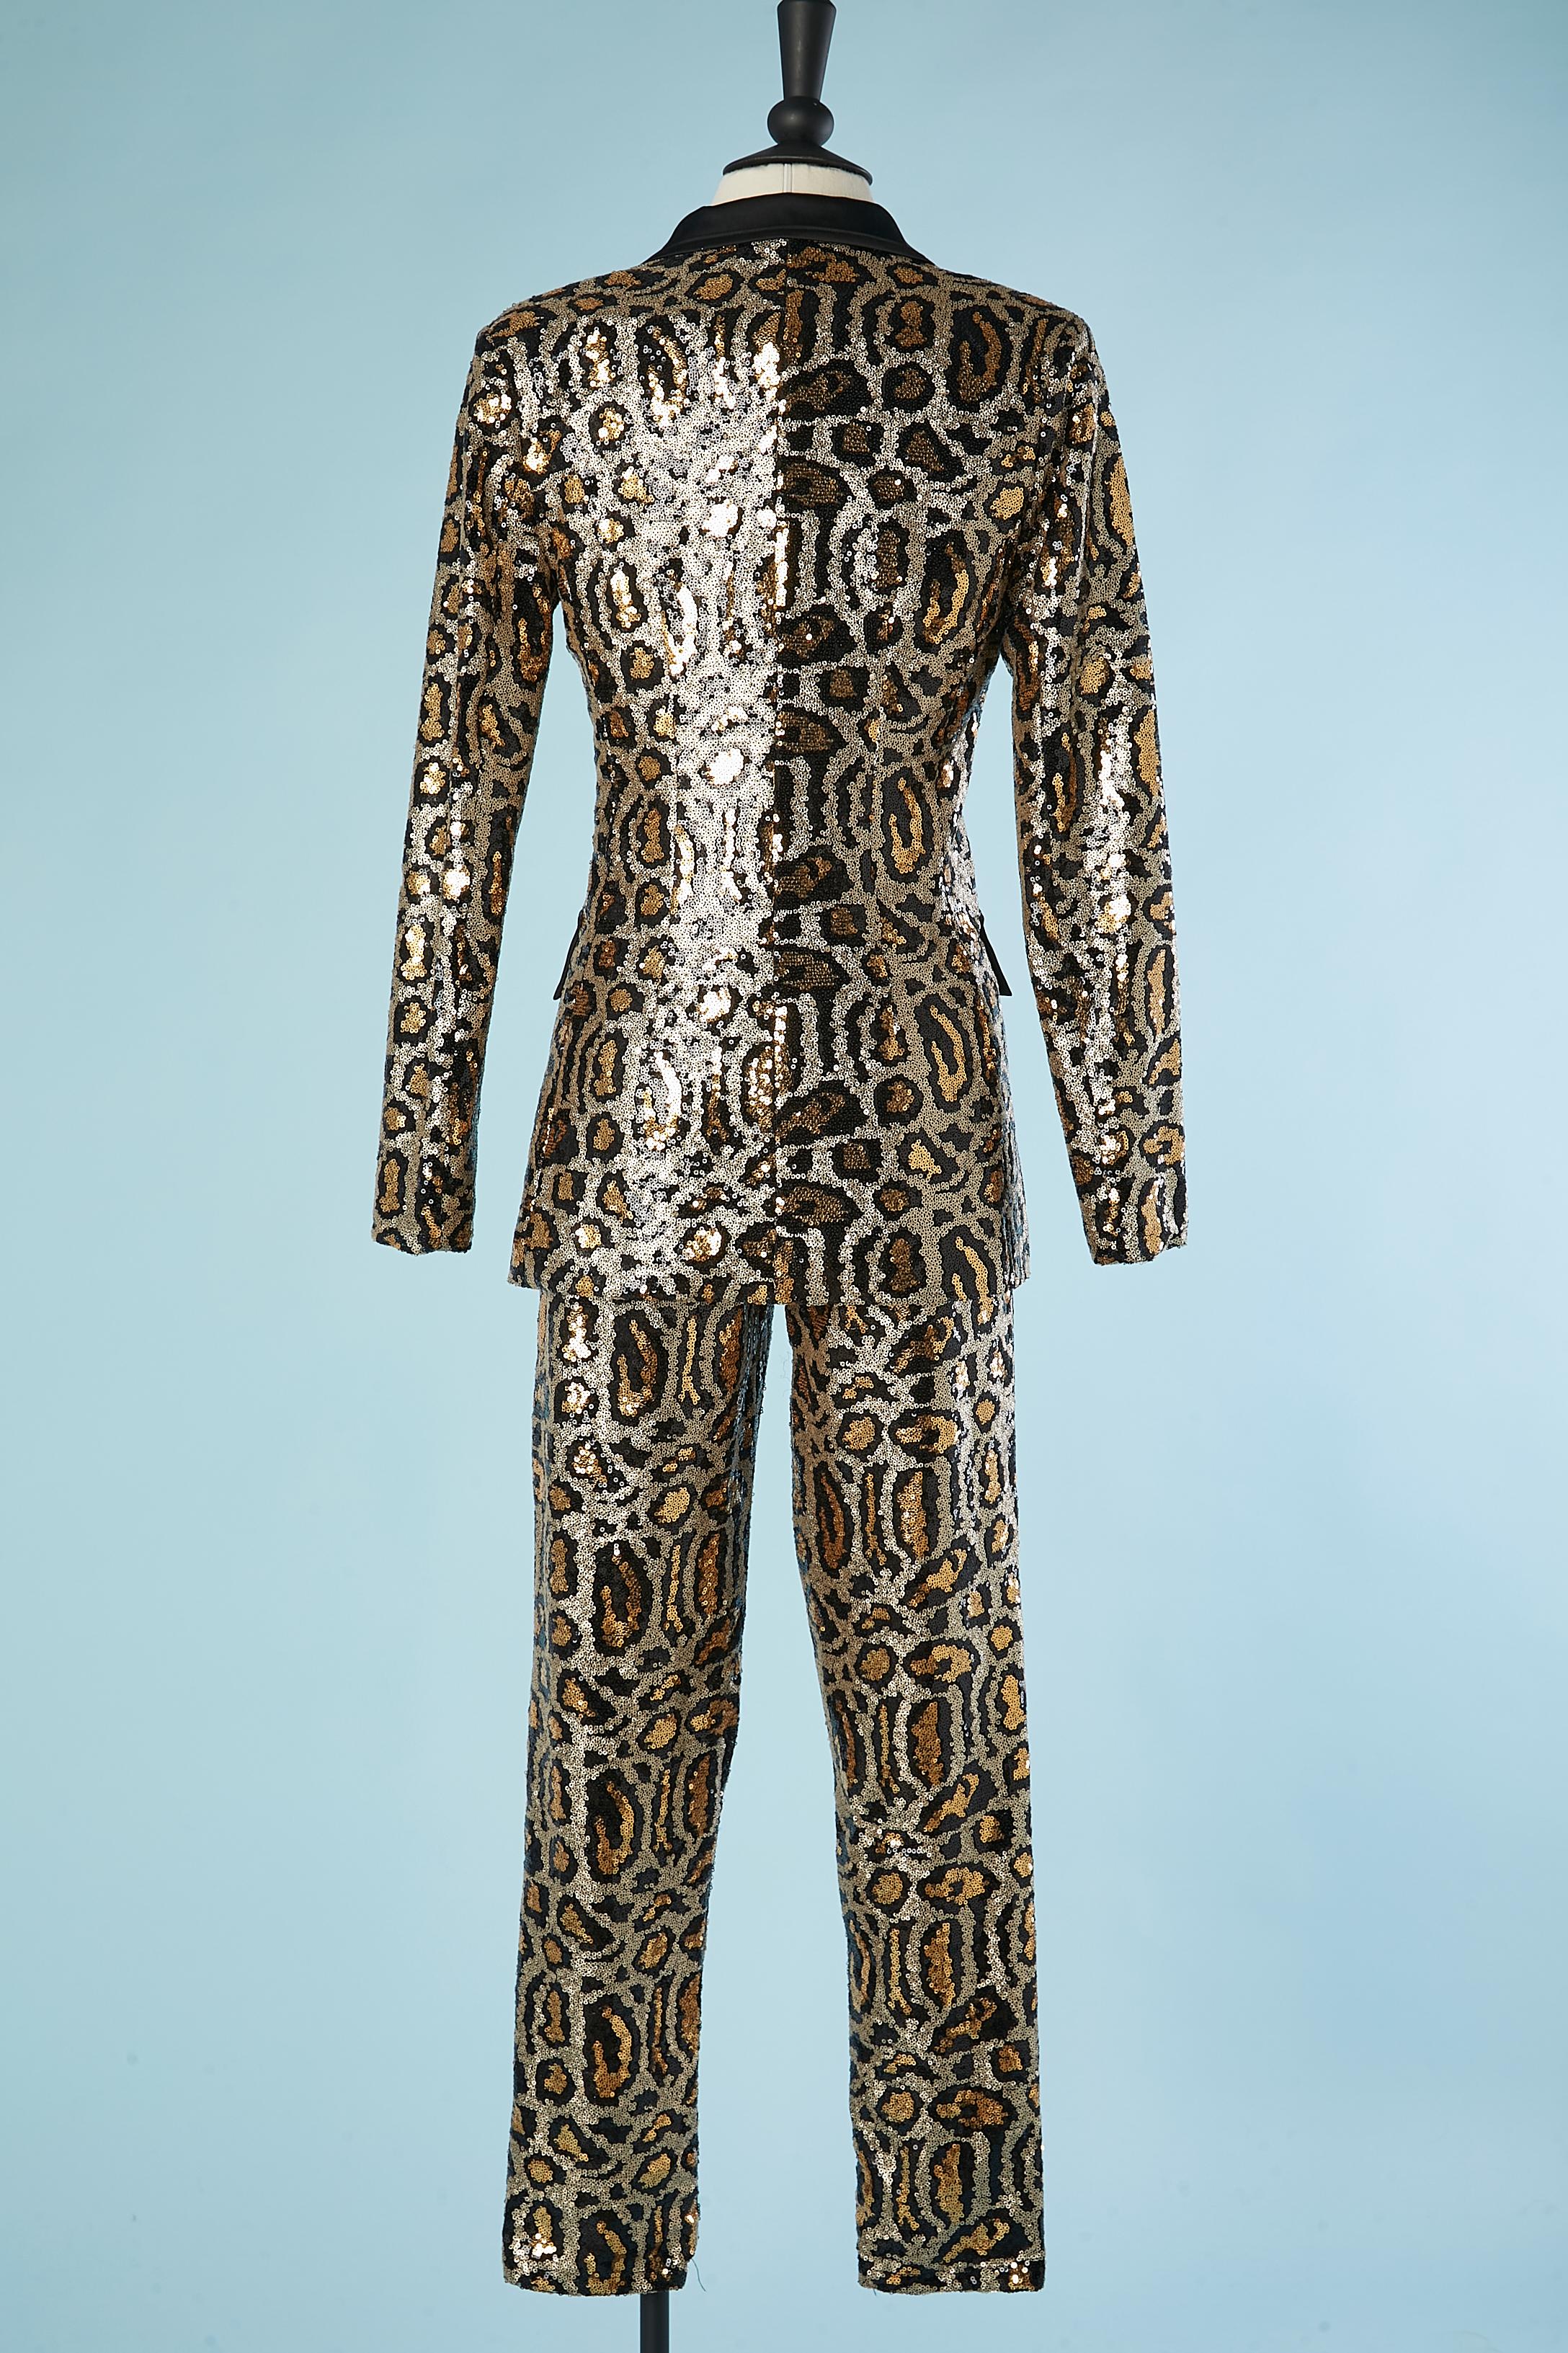 Evening double breasted trouser suit in sequin leopard pattern Circa 2000 For Sale 2